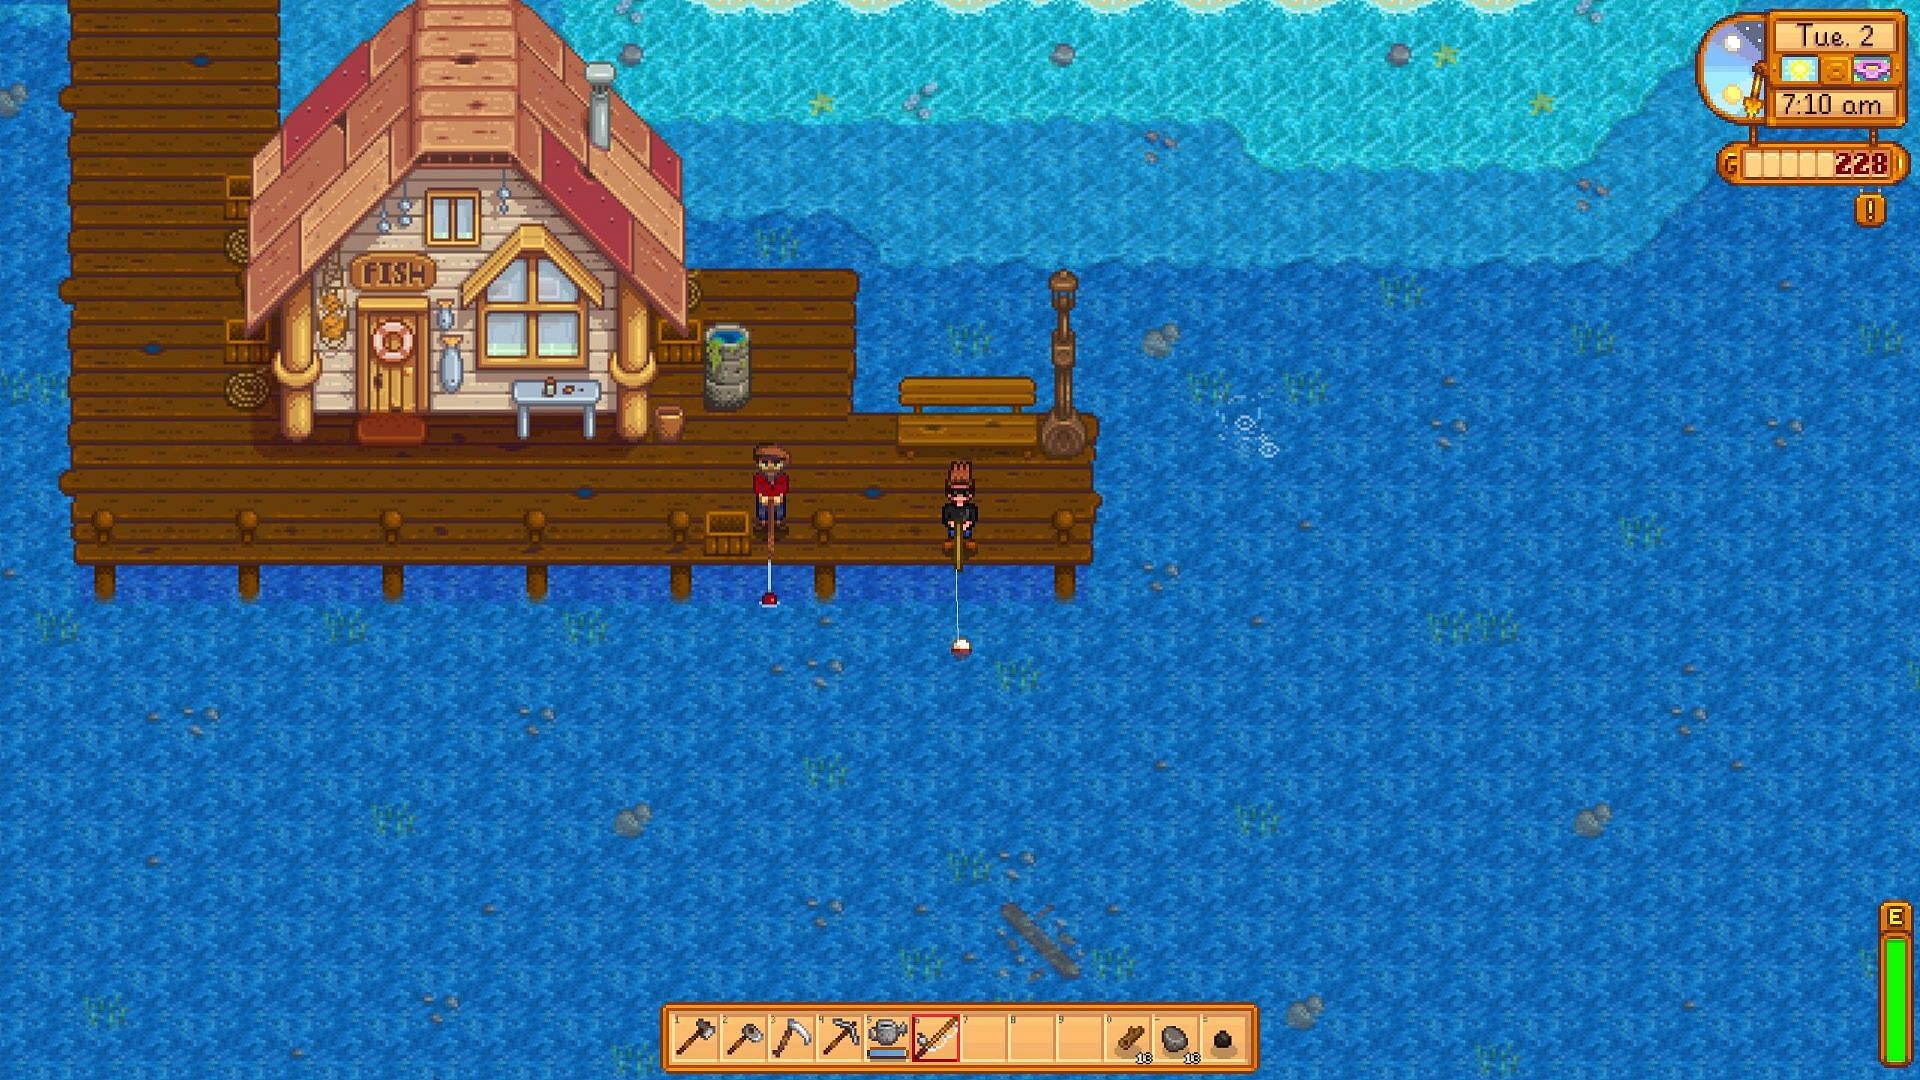 Fishing near the Fish Shop in Stardew Valley (Image via ConcernedApe)